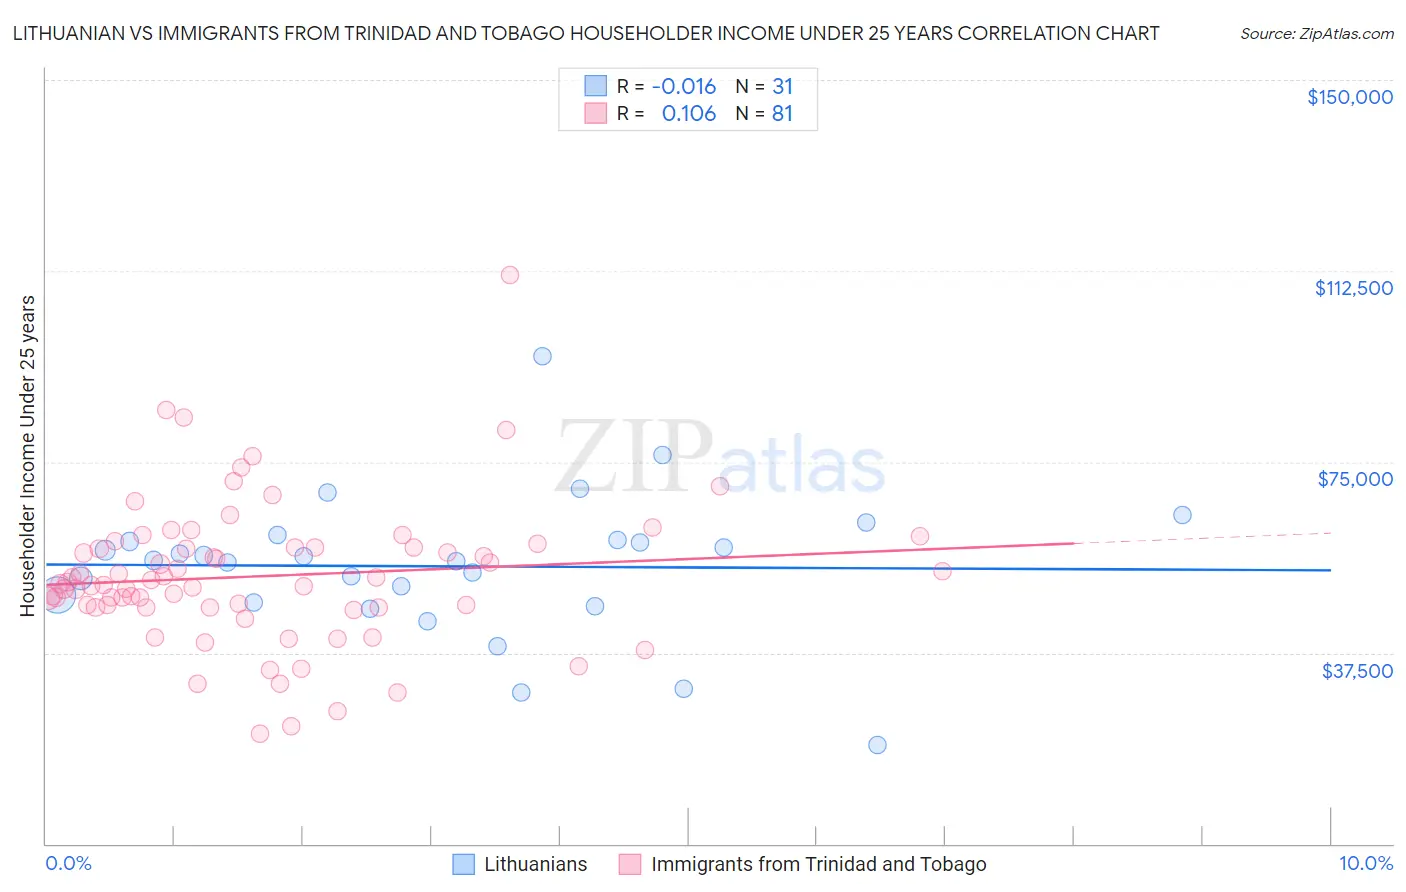 Lithuanian vs Immigrants from Trinidad and Tobago Householder Income Under 25 years